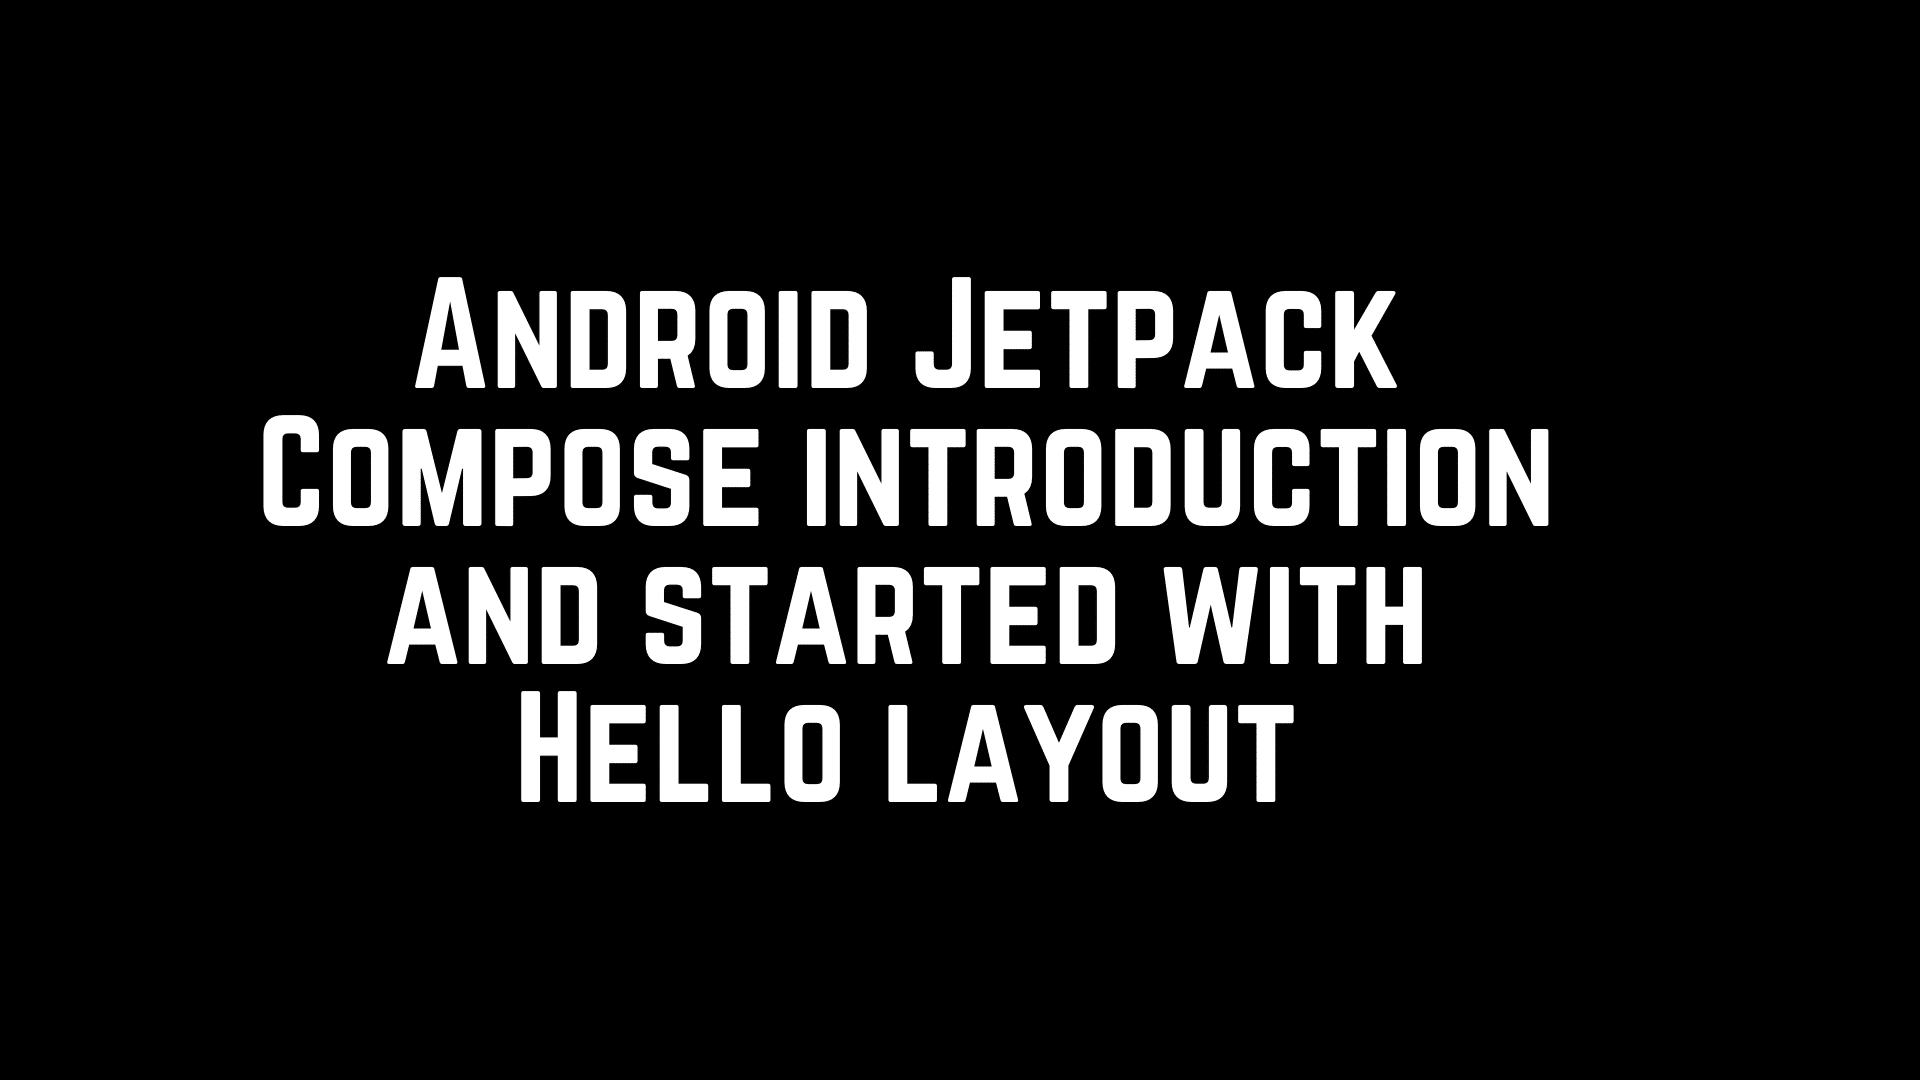 Android Jetpack Compose introduction and started with Hello layout